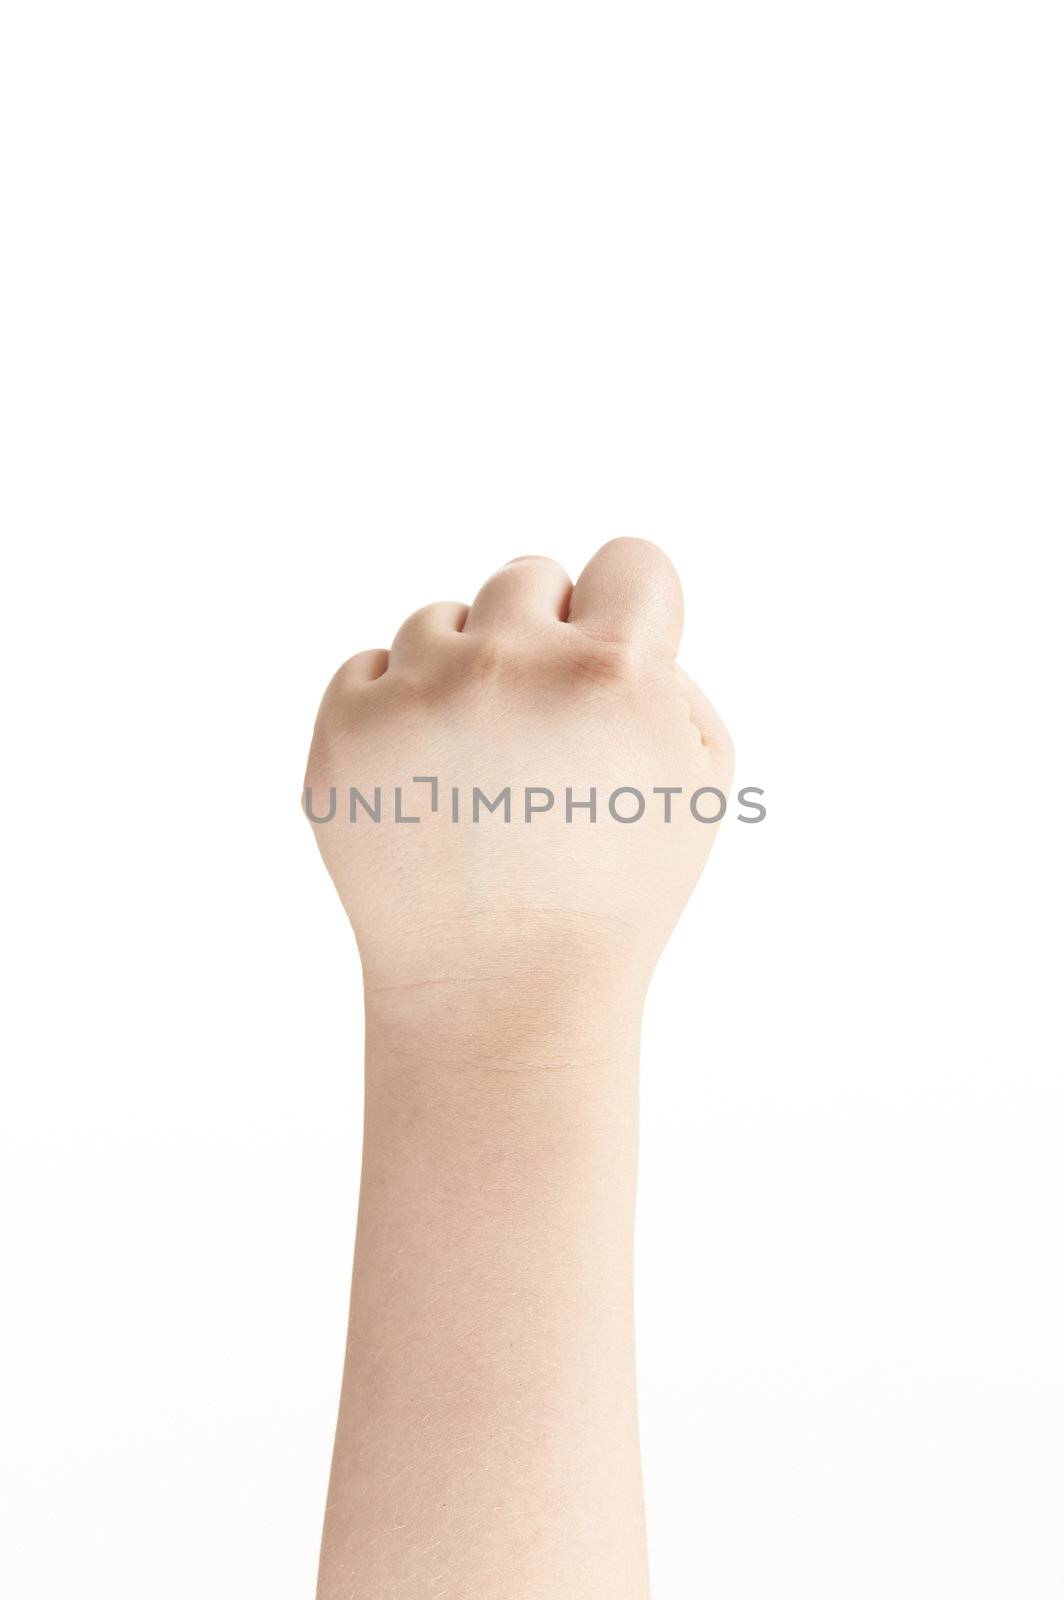 Clenched fist shown by childs hand - on white background